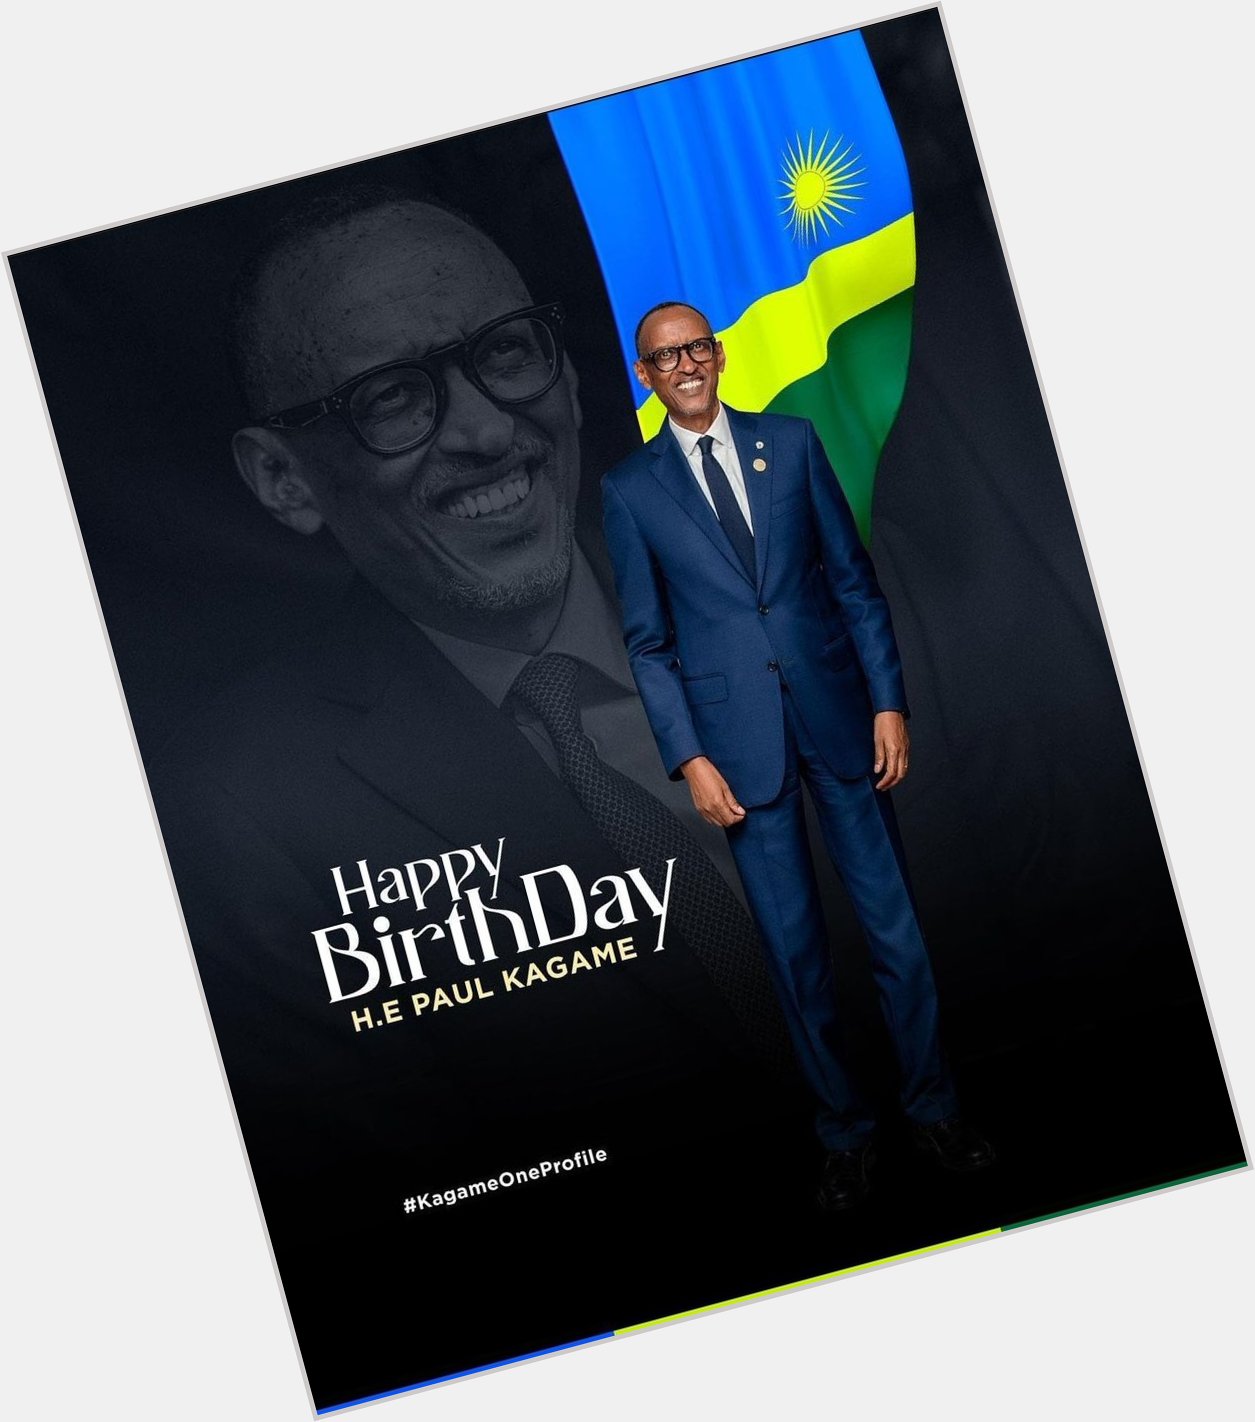 Happy 65th Birthday Our Hero, President Paul KAGAME. You deserve a Long and Fulfilling Life.

BABA WA TAIFA    